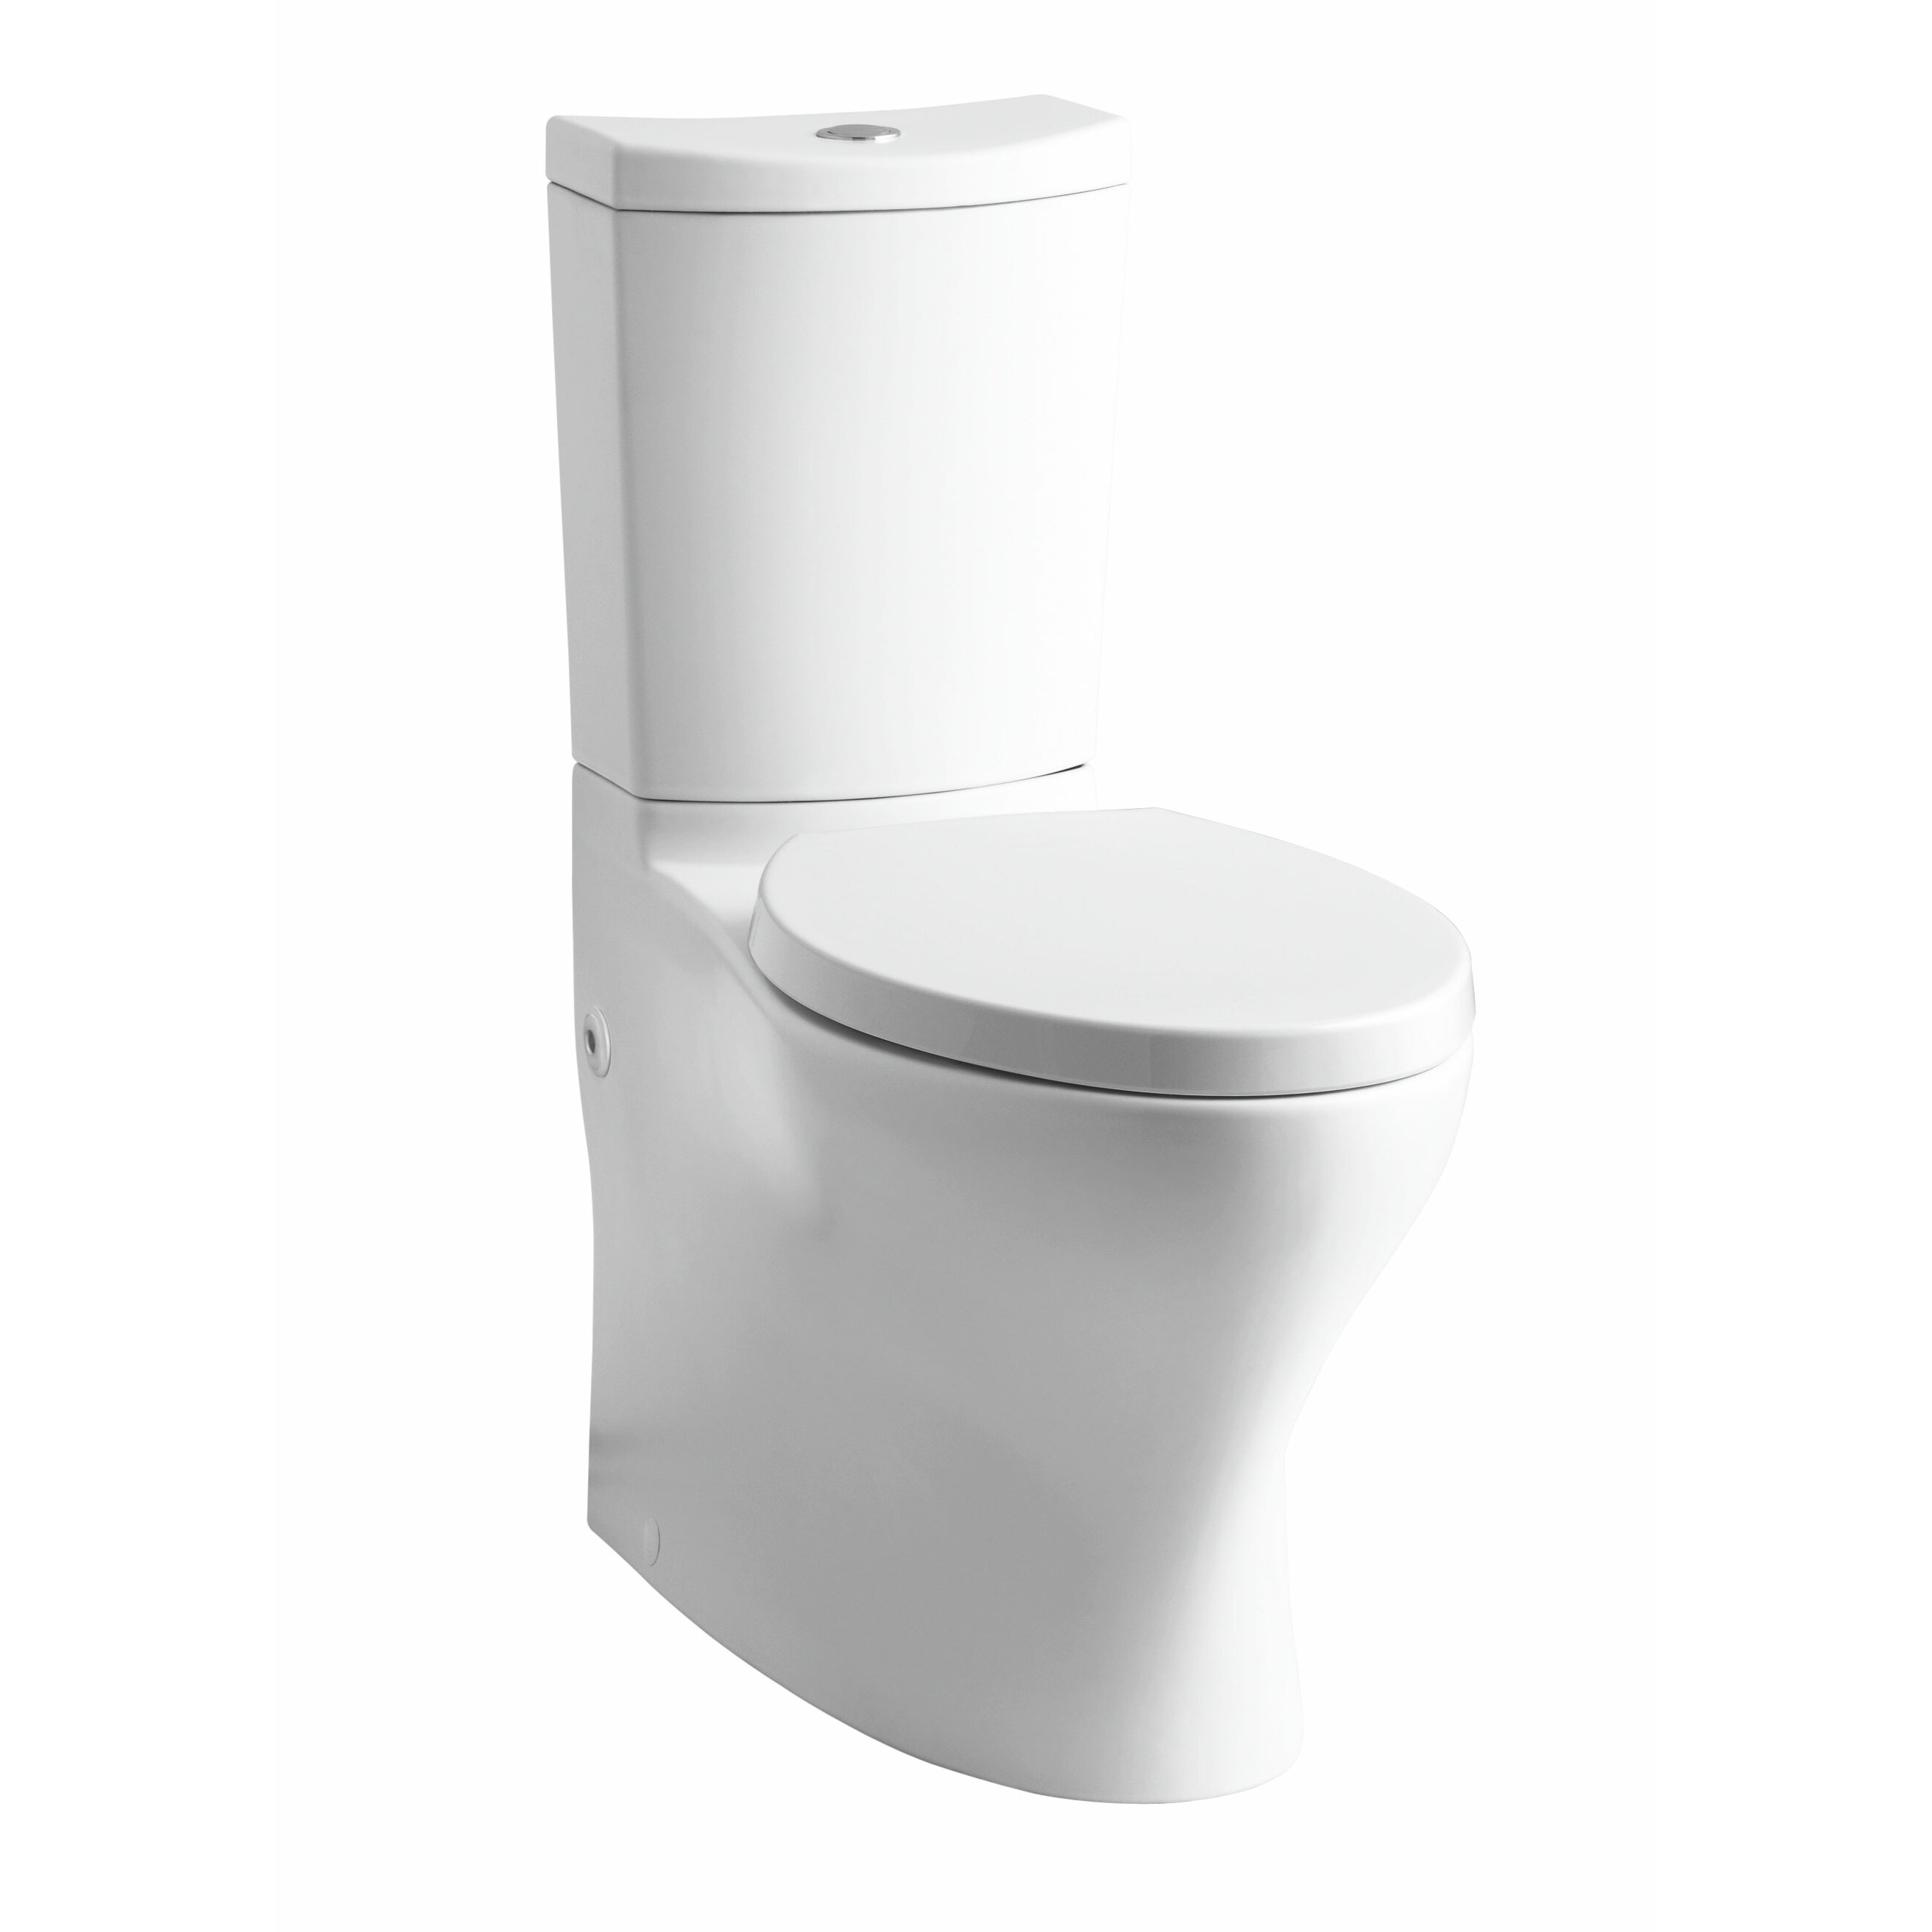 What is an elongated toilet?